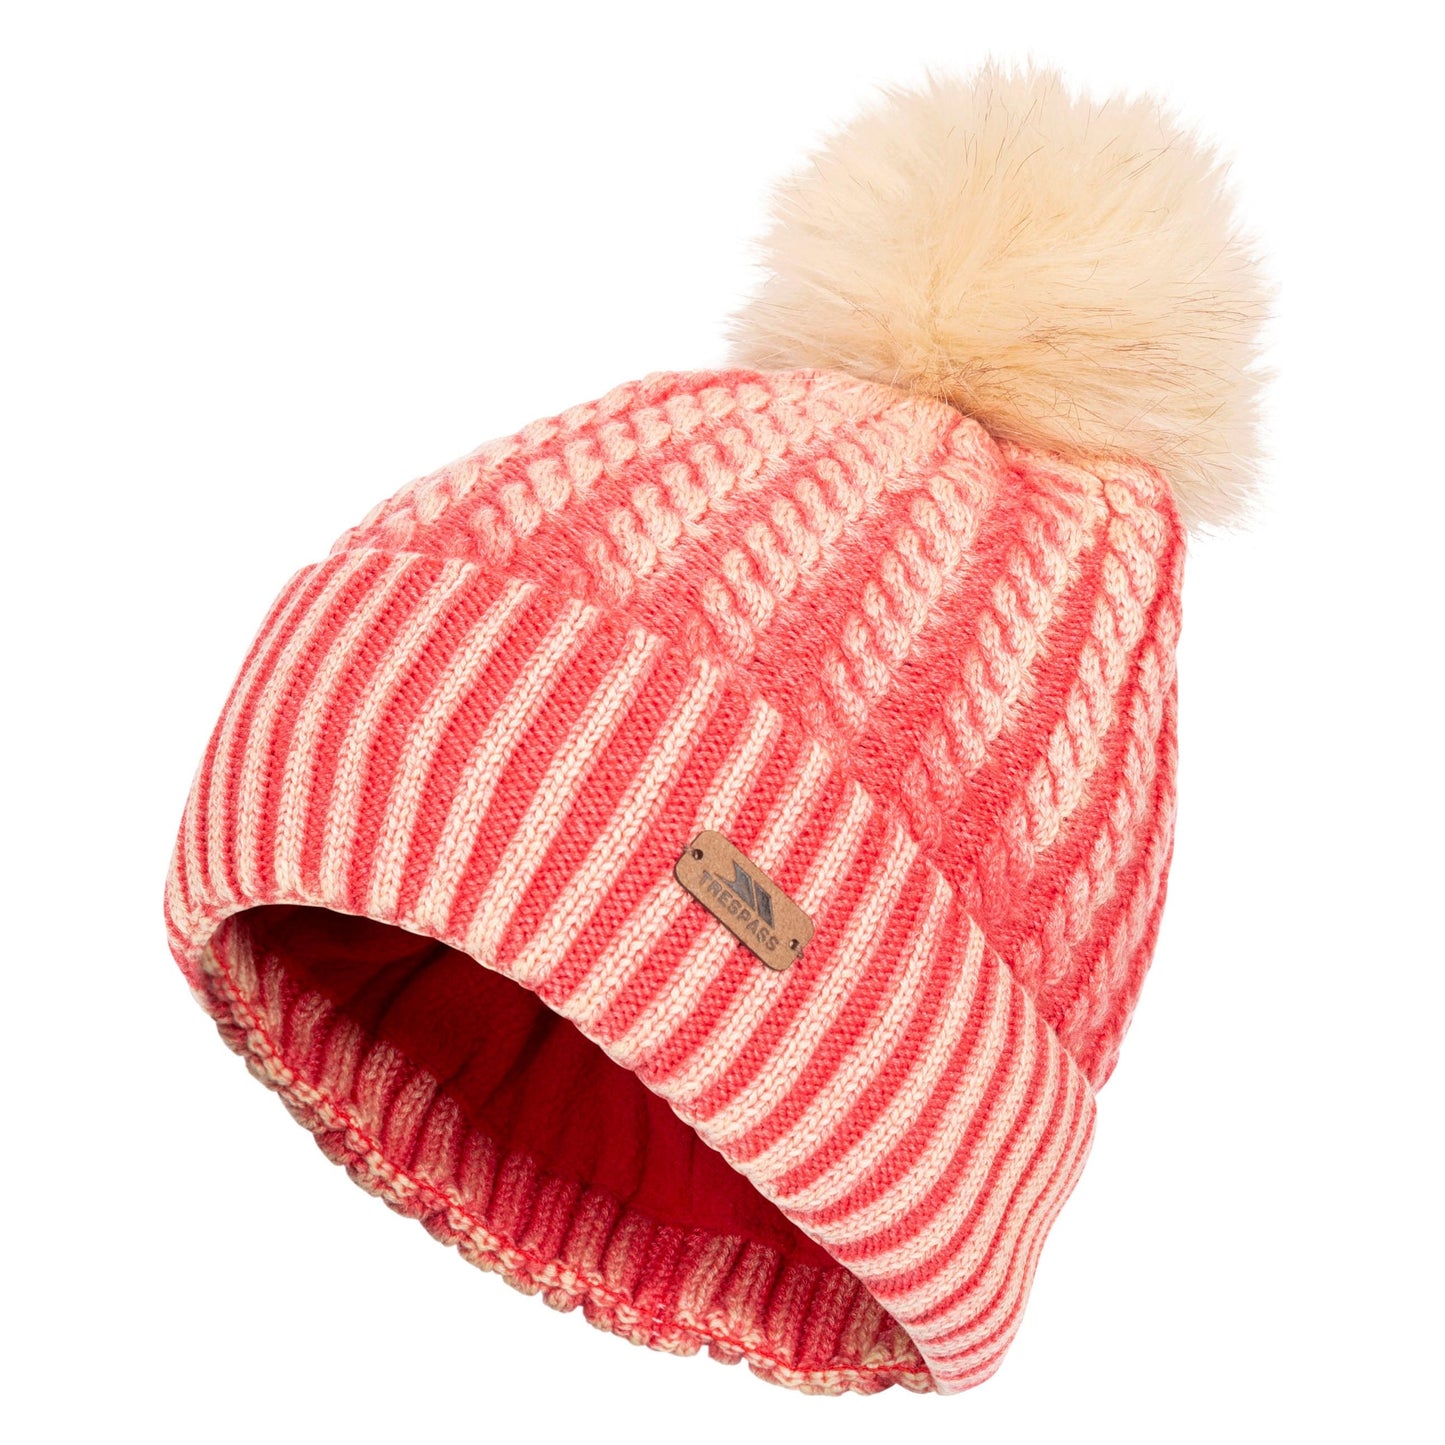 Faded Women's Knitted Hat - Hibiscus